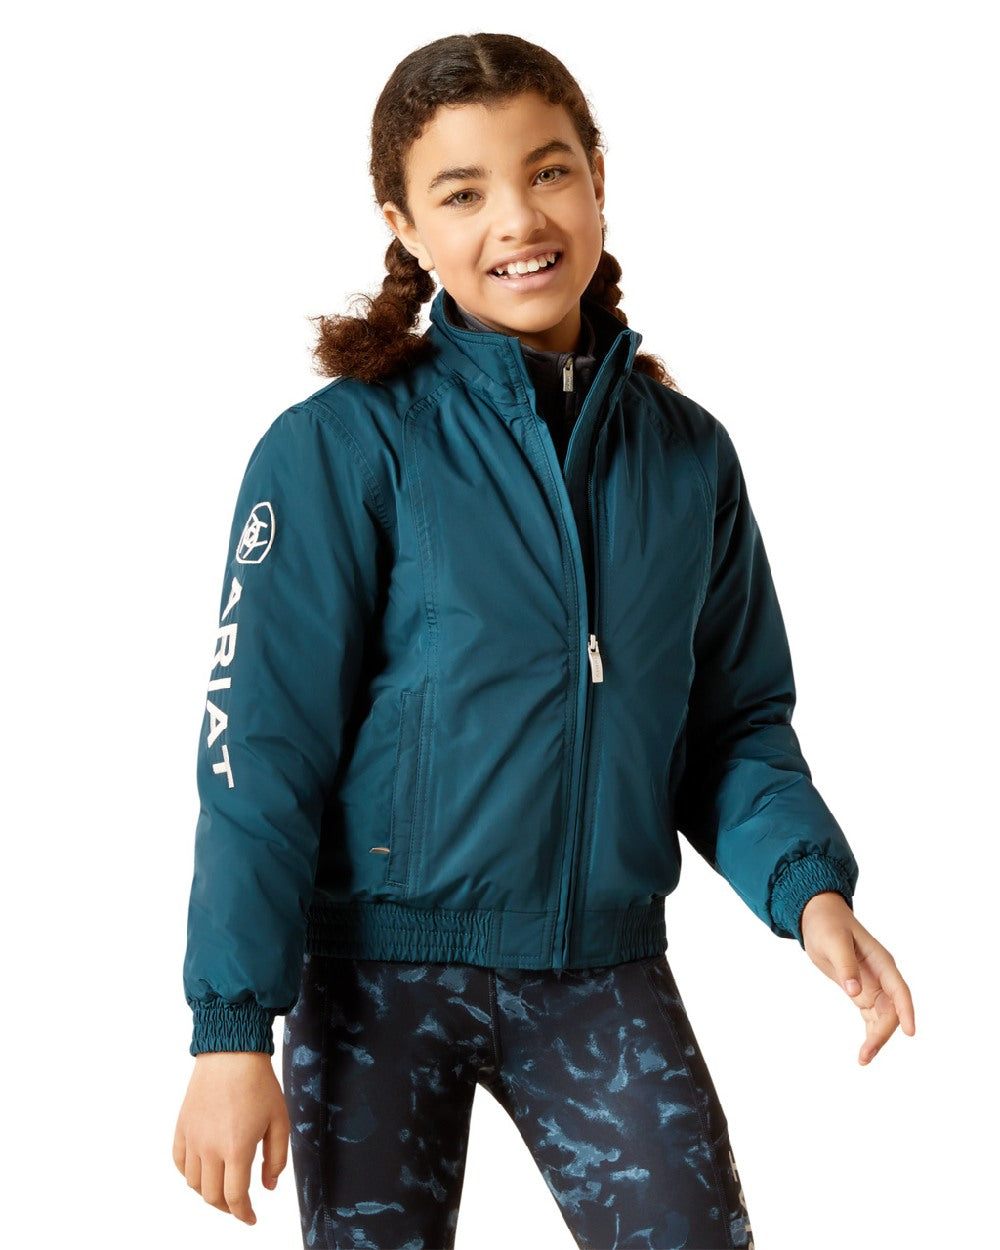 Ariat Childrens Stable Insulated Jacket in Reflecting Pond 